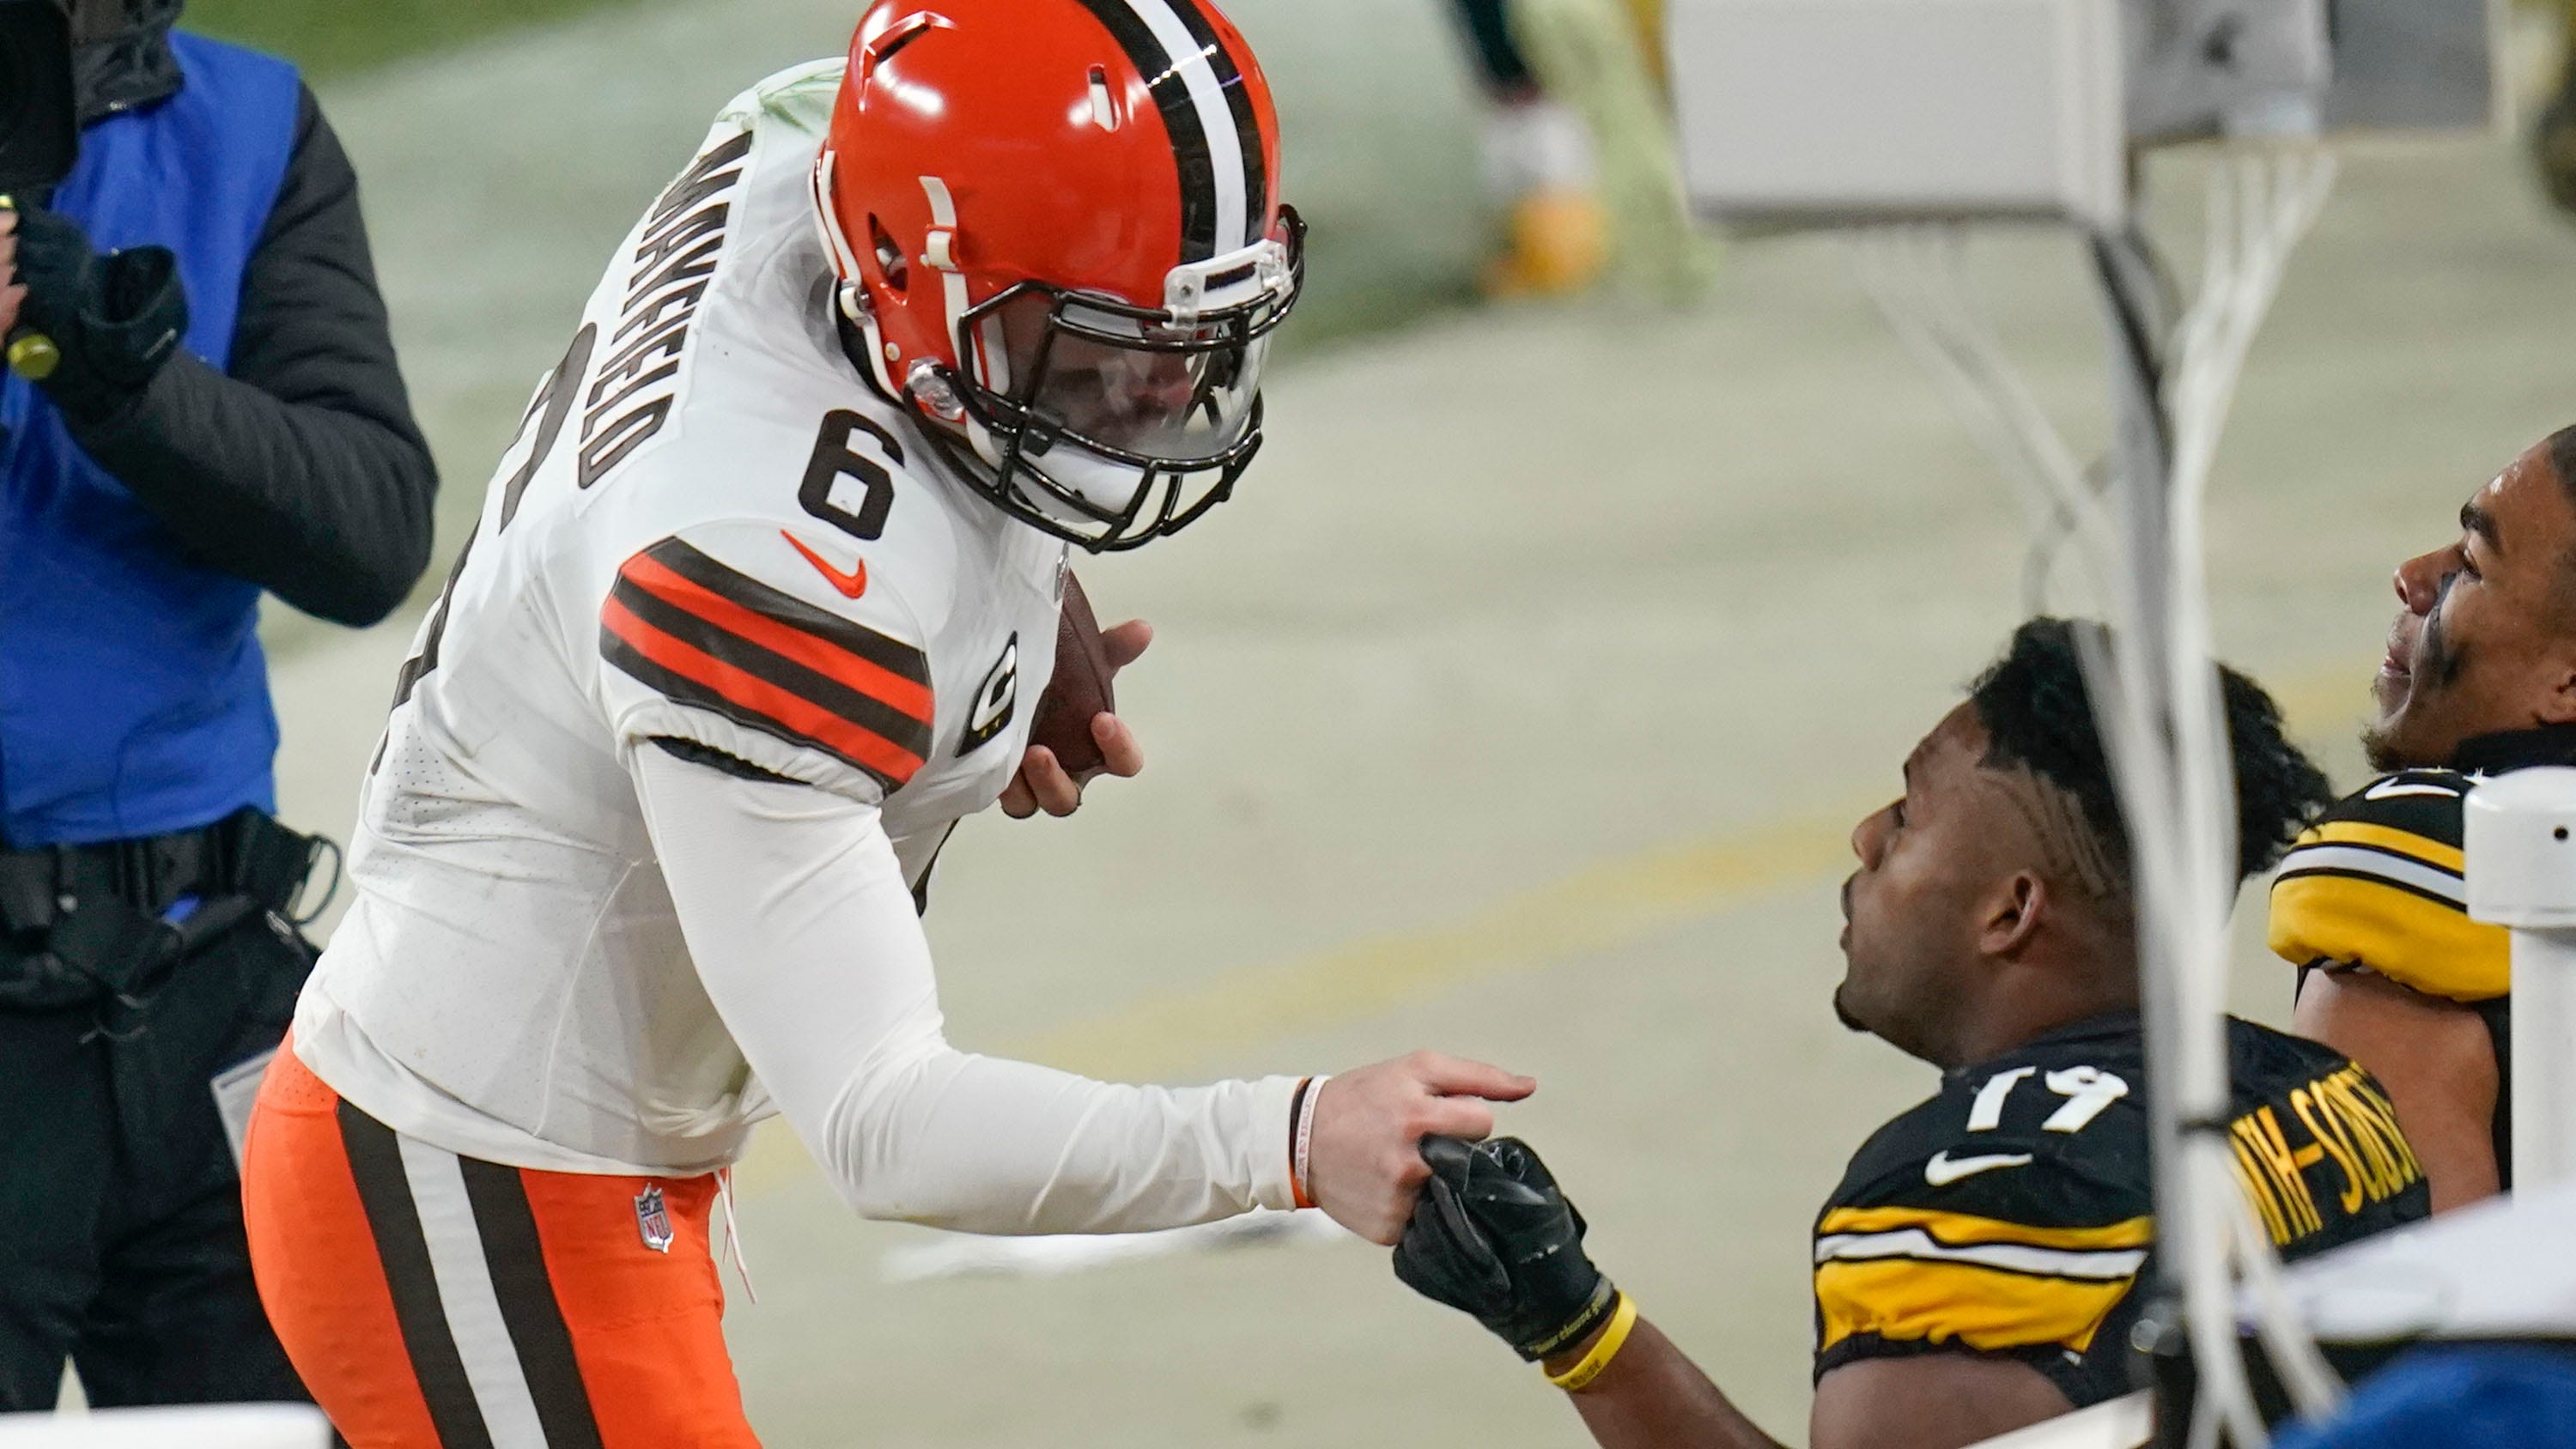 Steelers JuJu Smith-Schuster supports the “Browns are the Browns” comment after the wild card defeat